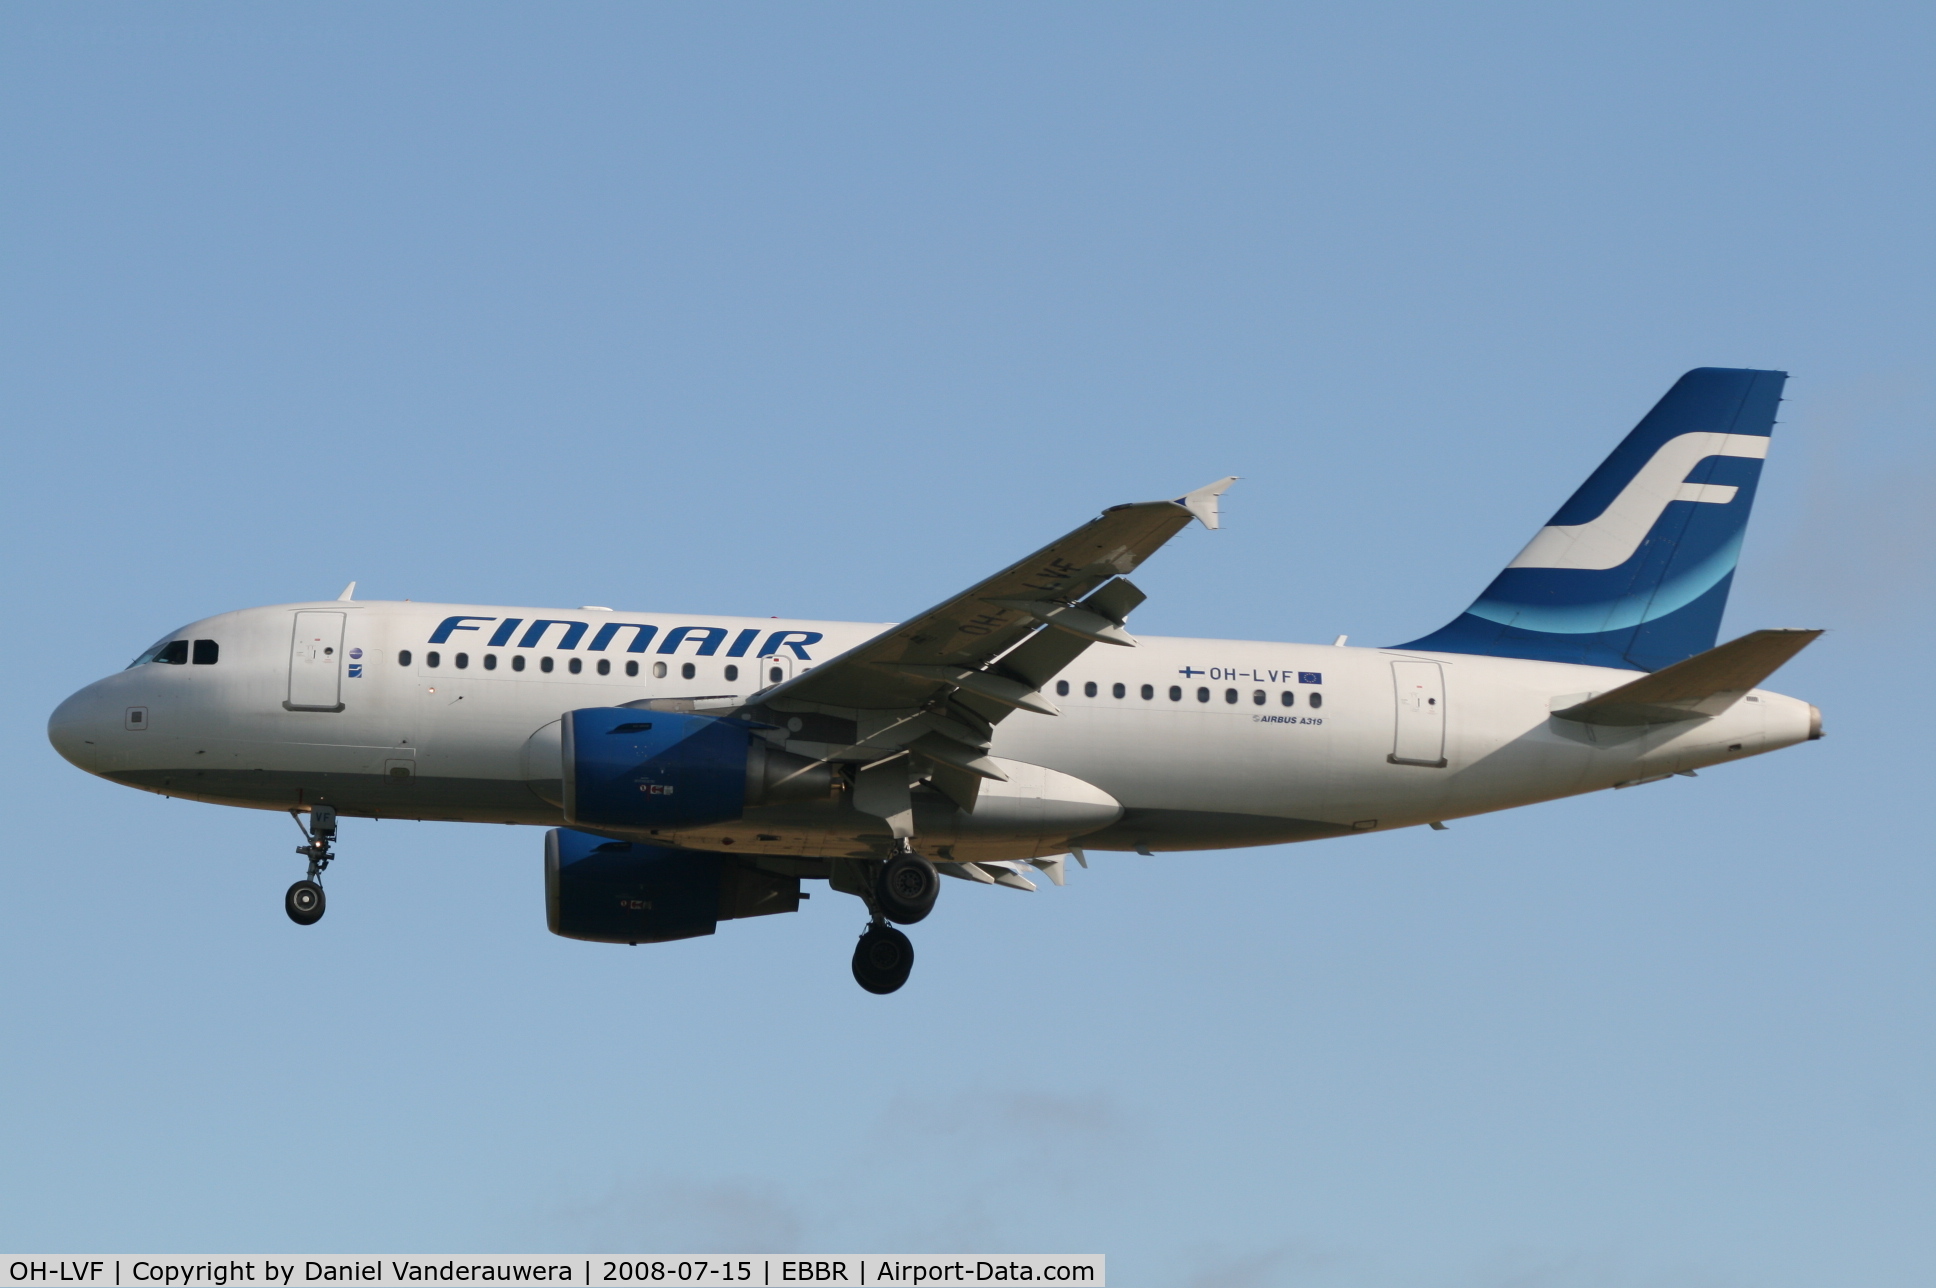 OH-LVF, 2002 Airbus A319-112 C/N 1808, arrival of flight AY811 to rwy 25L